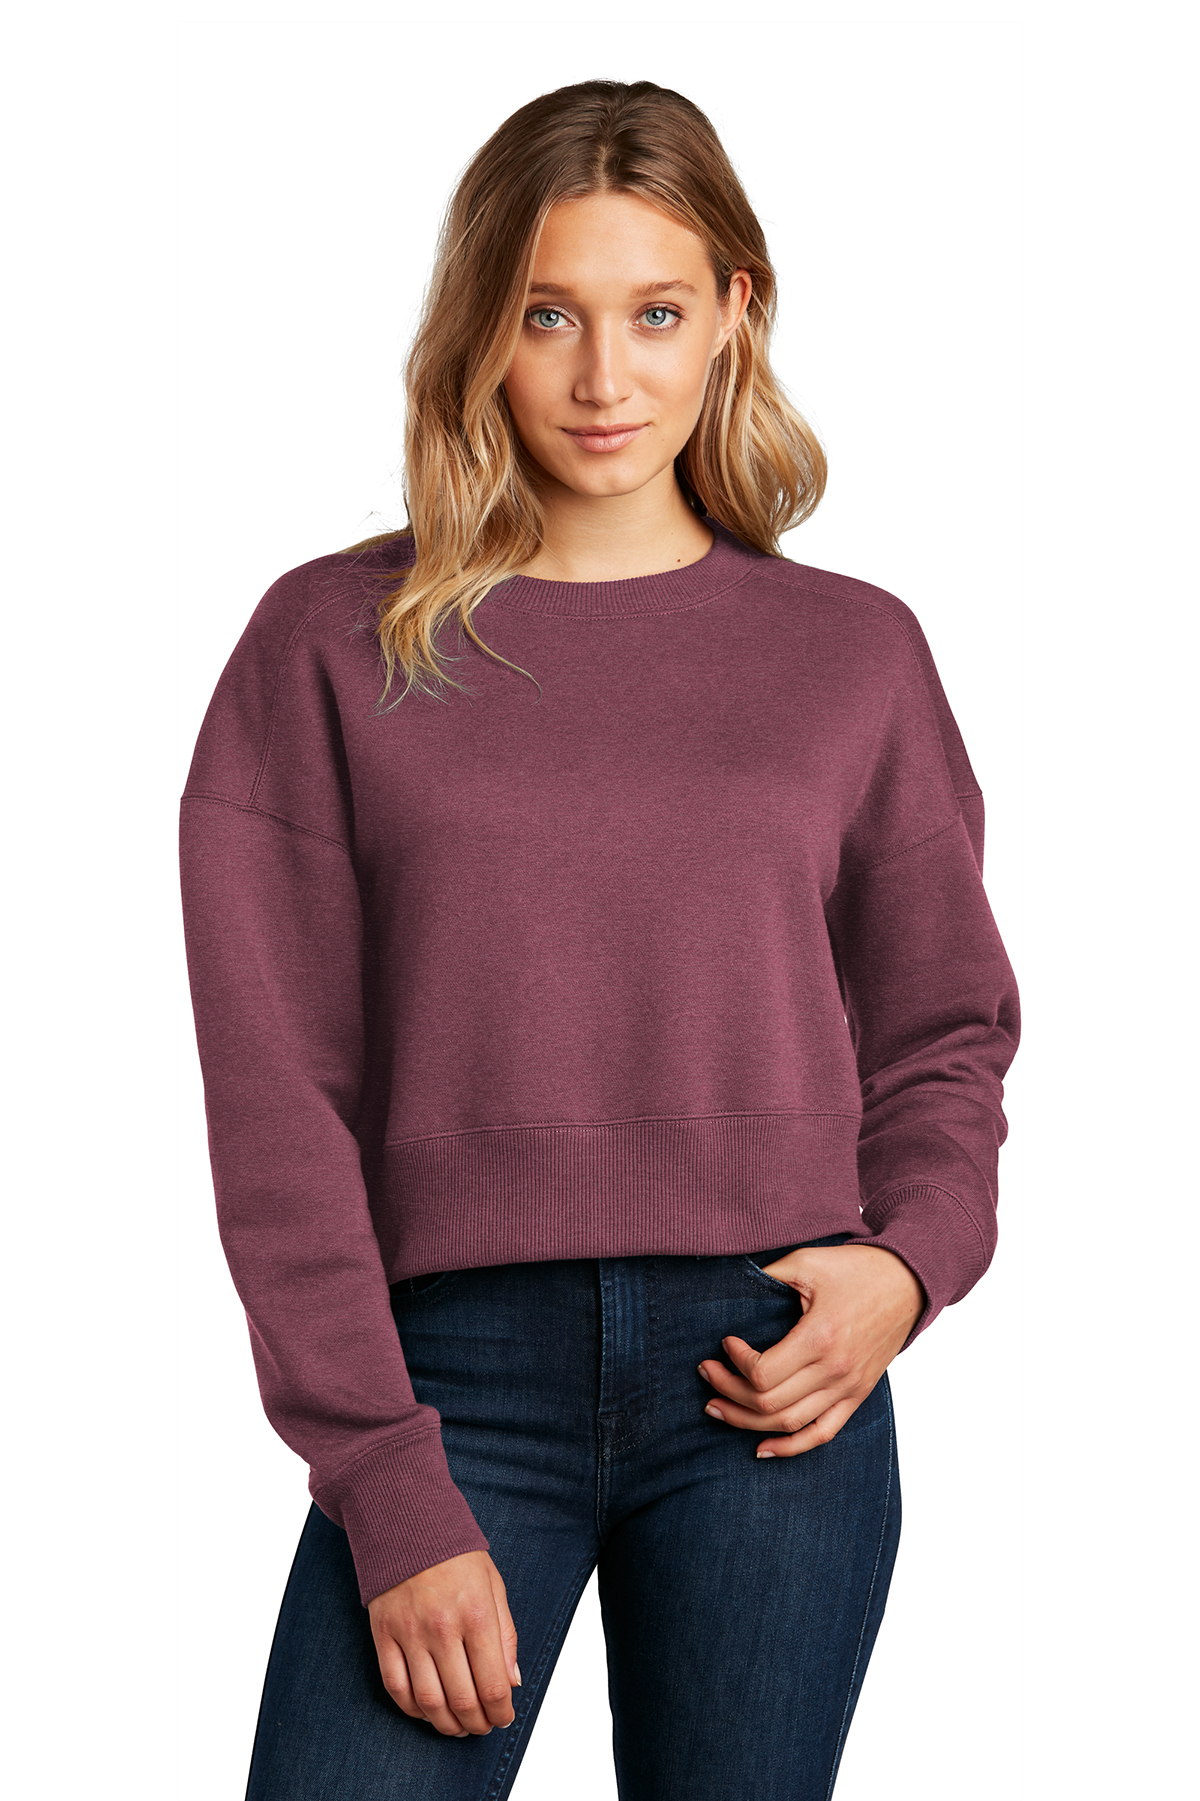 District ® DT1105 - Women's Perfect Weight ® Fleece Cropped Crew